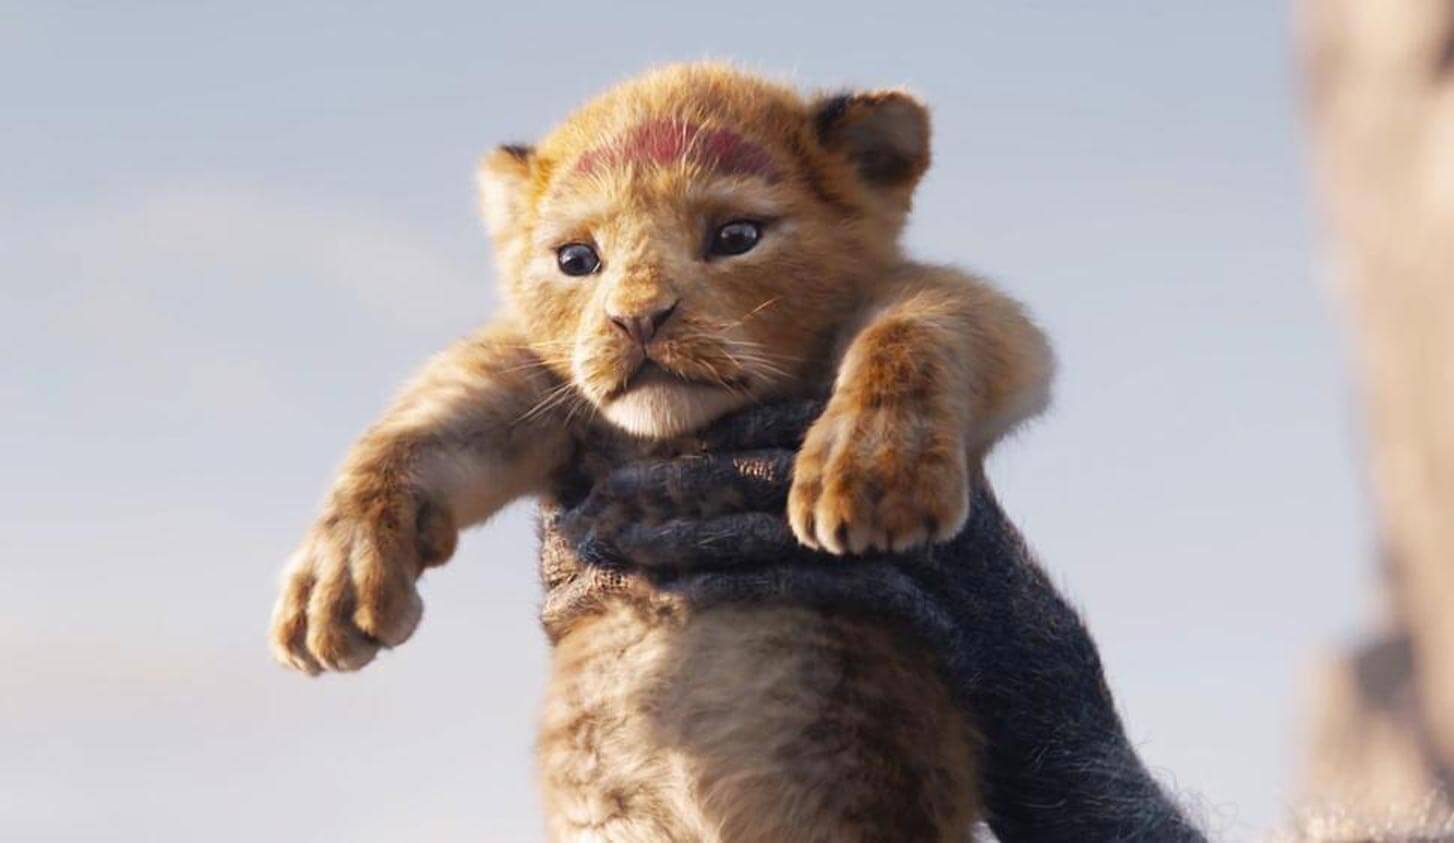 Long Live 'The Lion King': Disney's Unveils Stunning First Trailer For Live-Action Remake